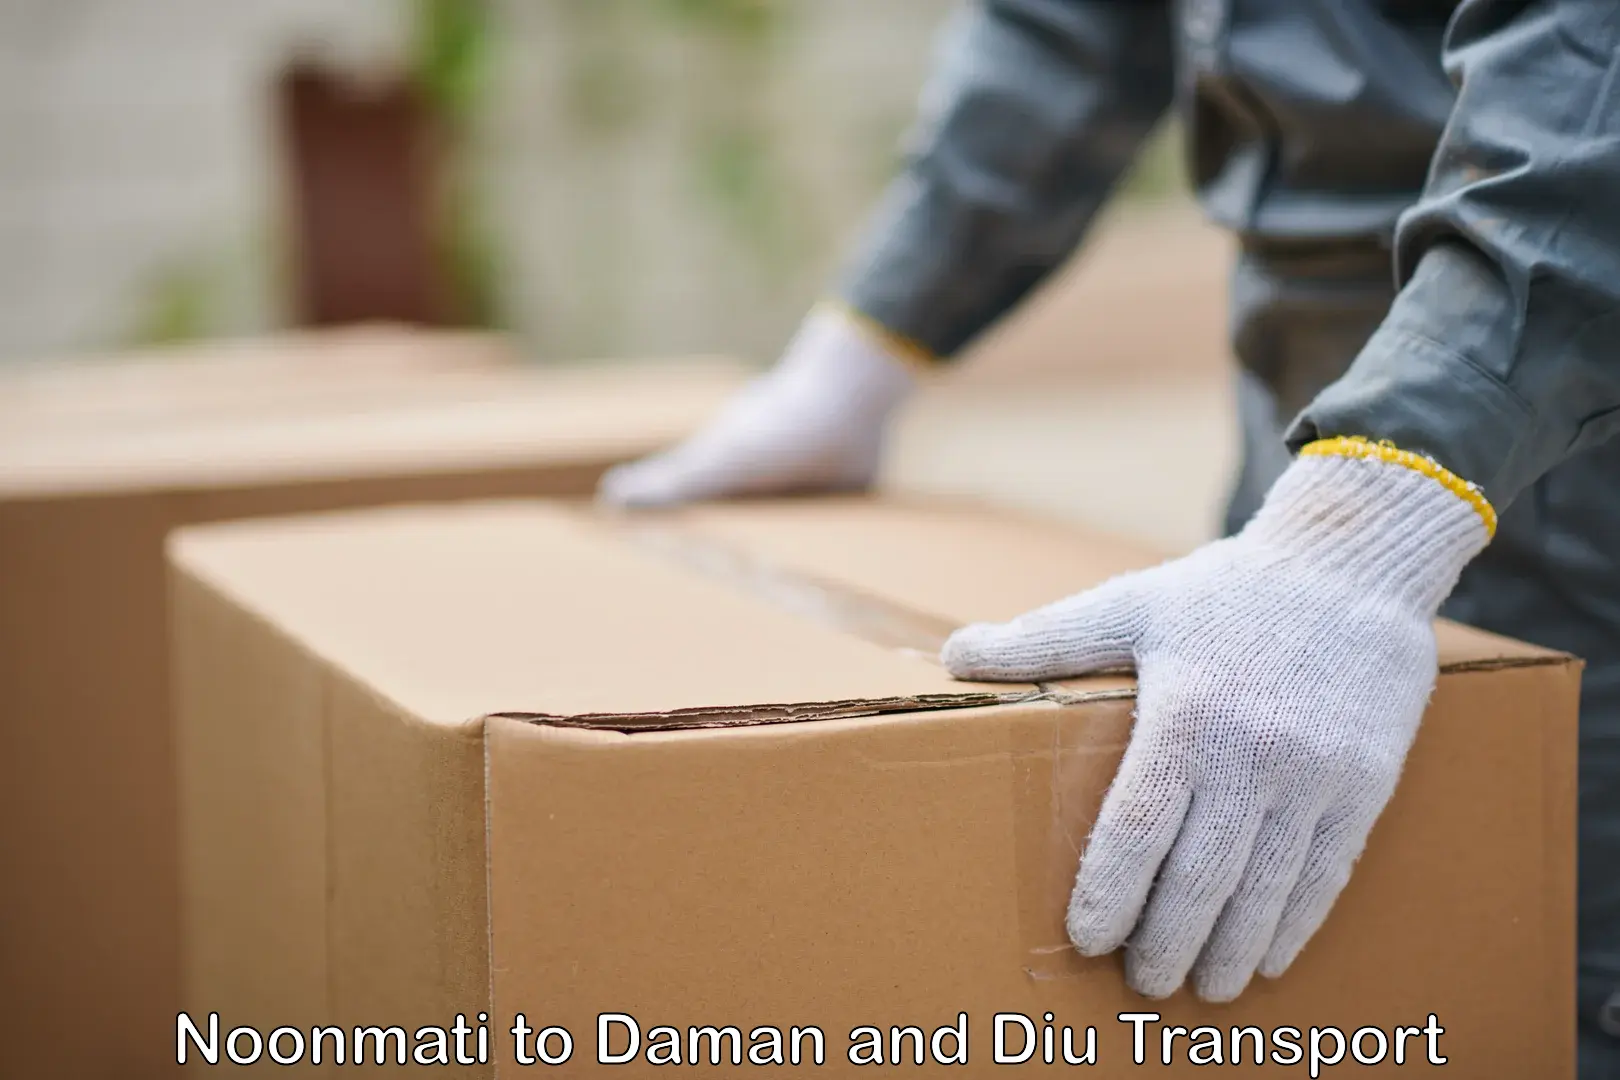 Container transport service Noonmati to Daman and Diu